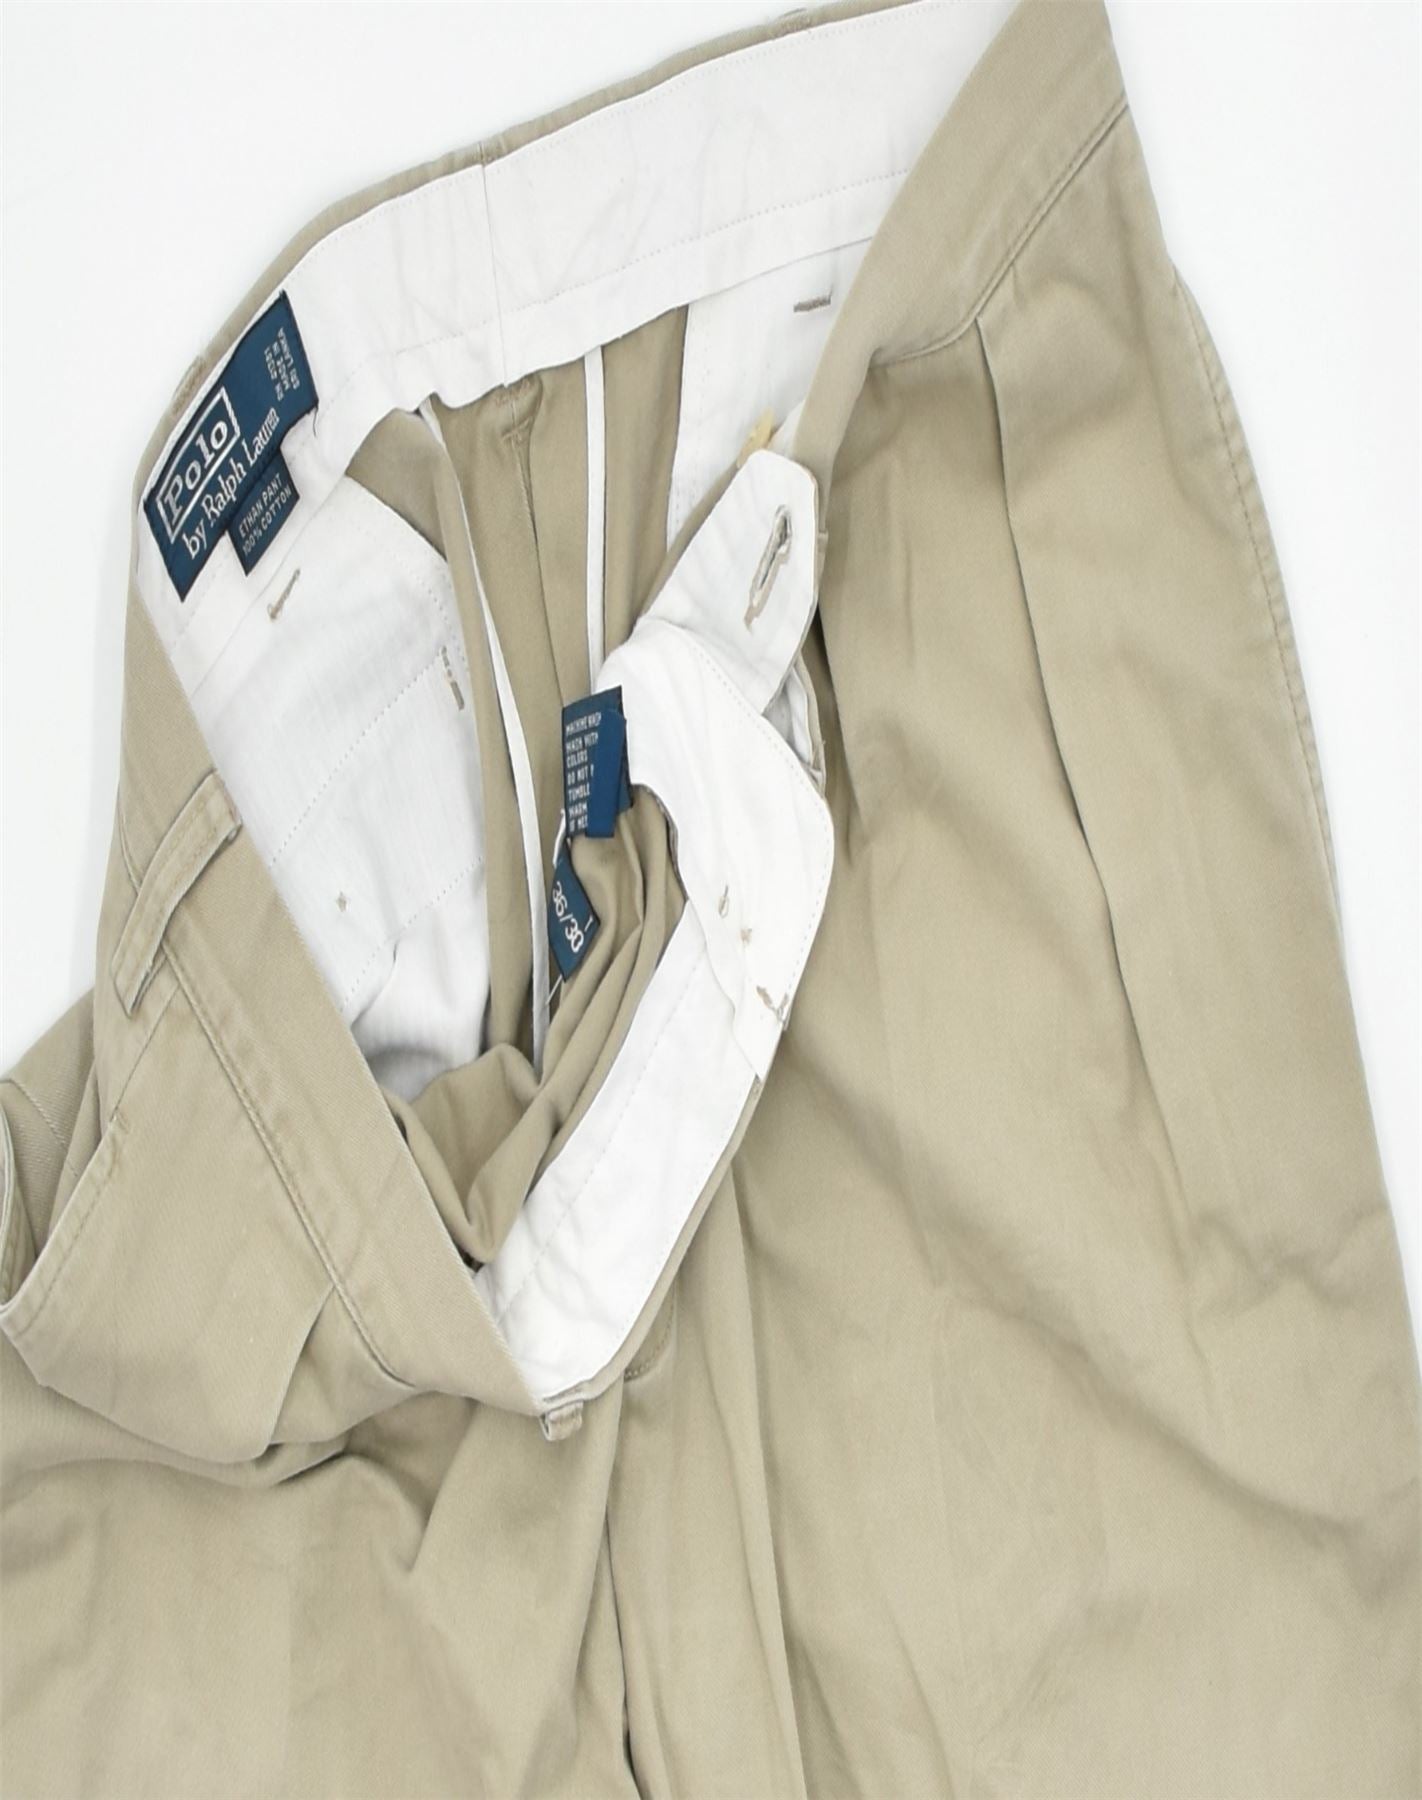 Polo Ralph Lauren Men's Chino Pants Slim Fit Flat Front Trousers New Nwt  34x34 | eBay